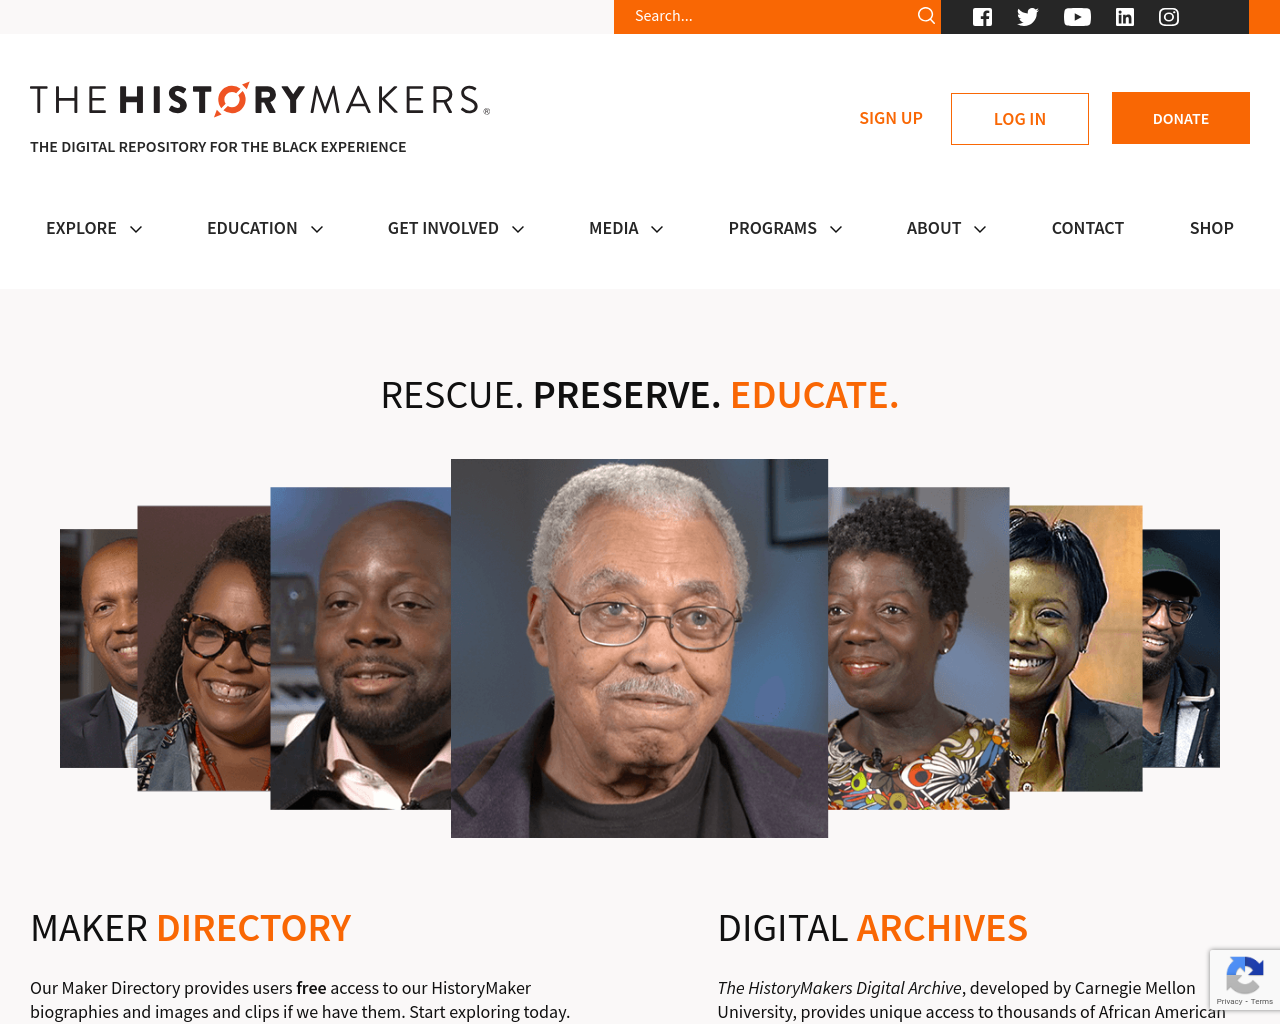 thehistorymakers.org